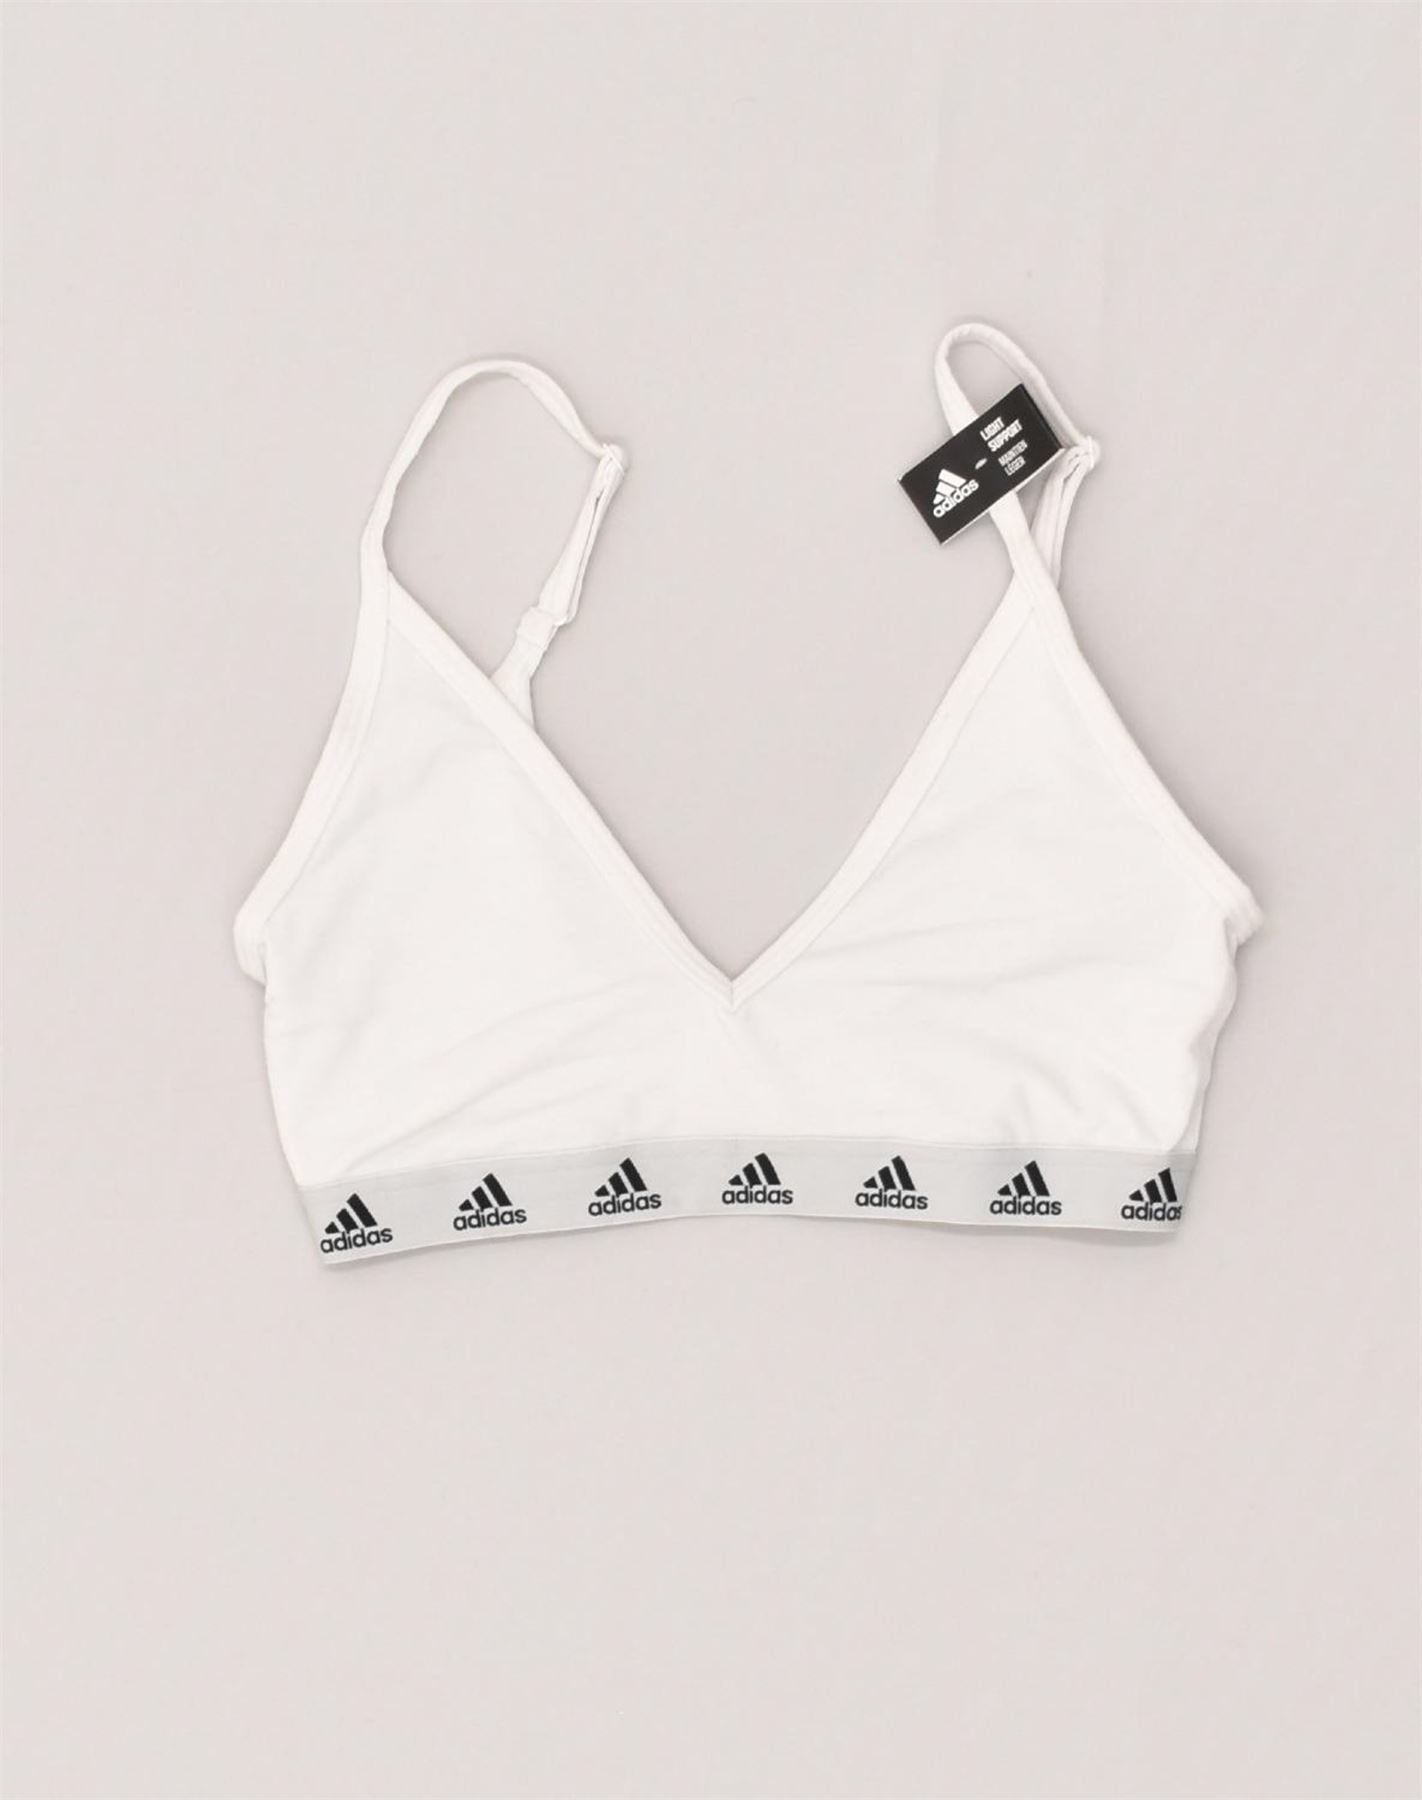 ADIDAS Womens Sport Bra Top UK 8 Small White Polyester, Vintage &  Second-Hand Clothing Online